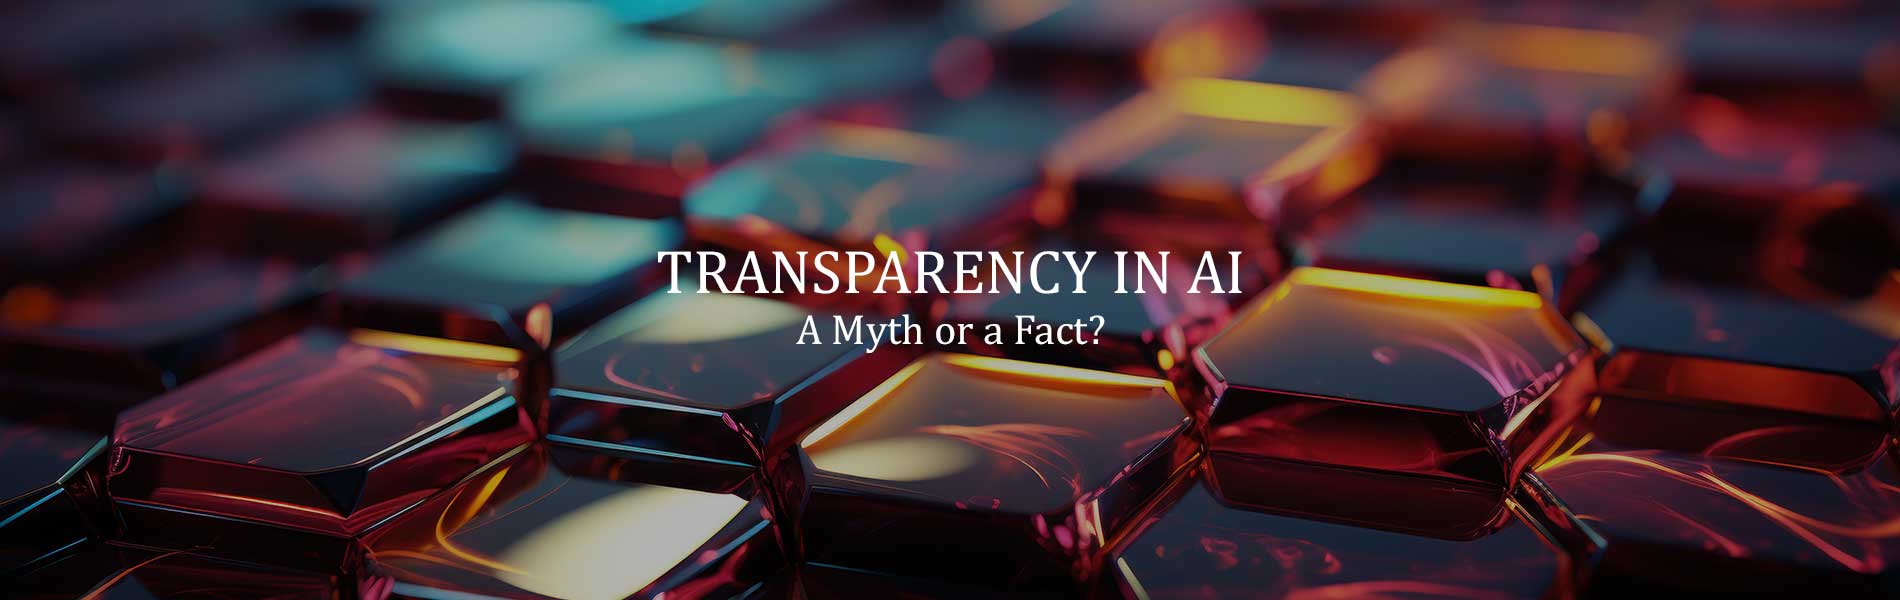 Transparency in AI: A Myth or a Fact?